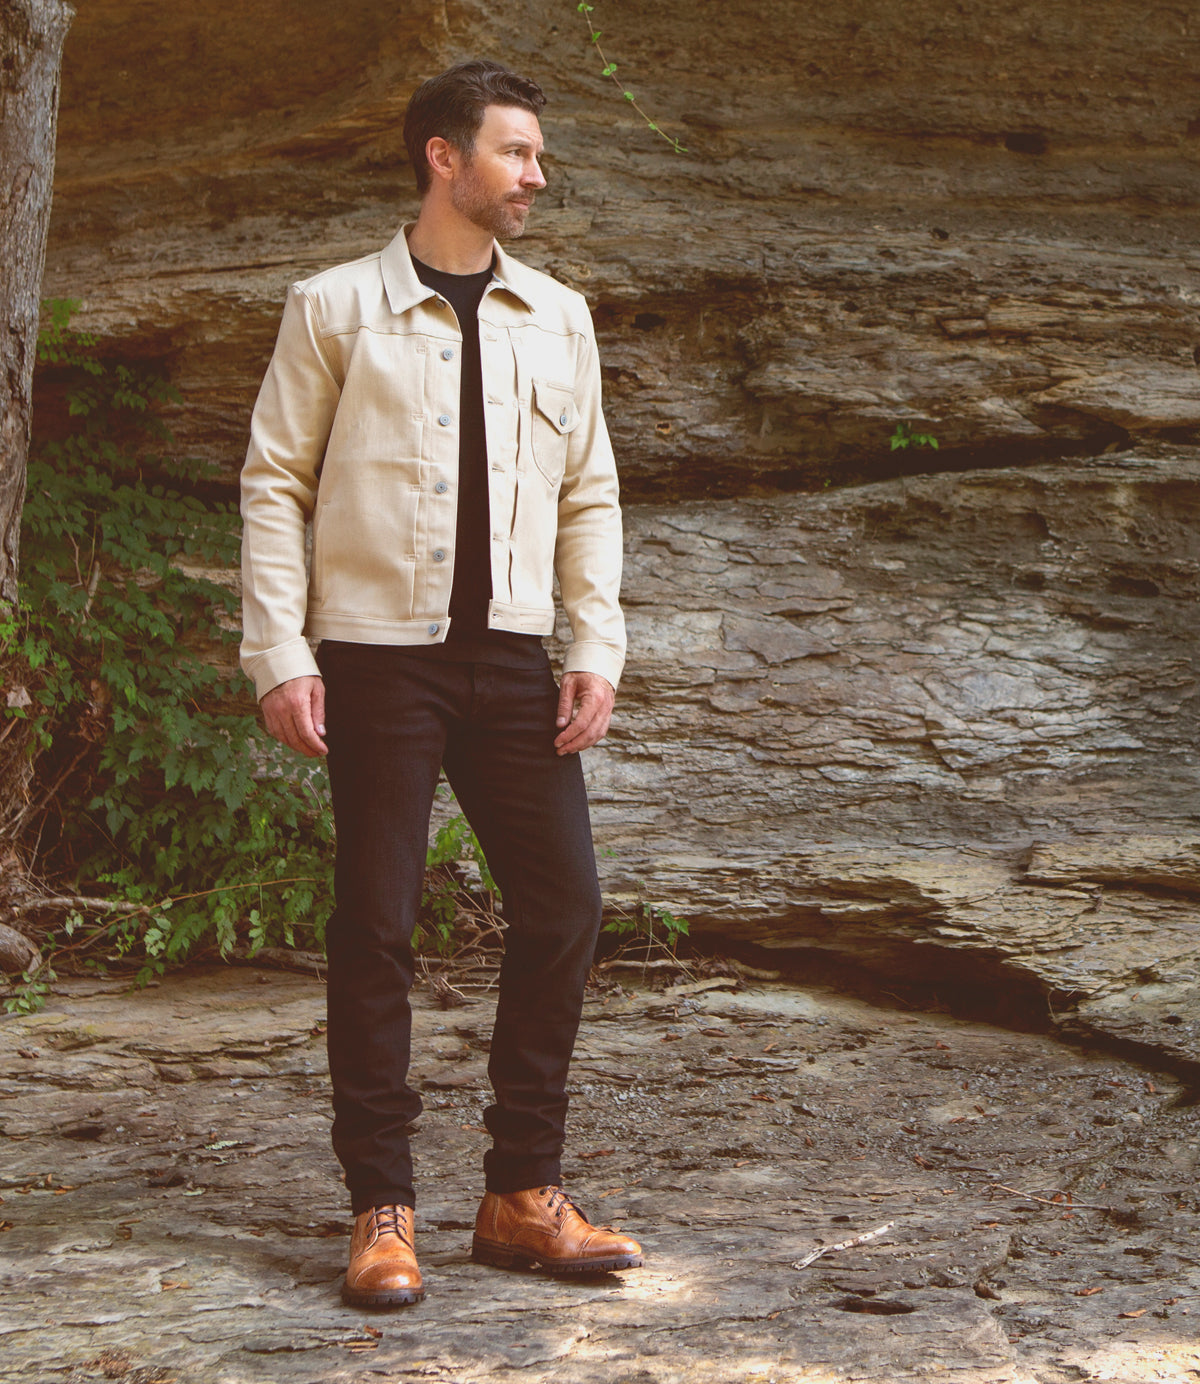 A man in a cream jacket, black jeans, and Bed Stu Protege Trek boots stands on a rocky terrain, looking to the side.